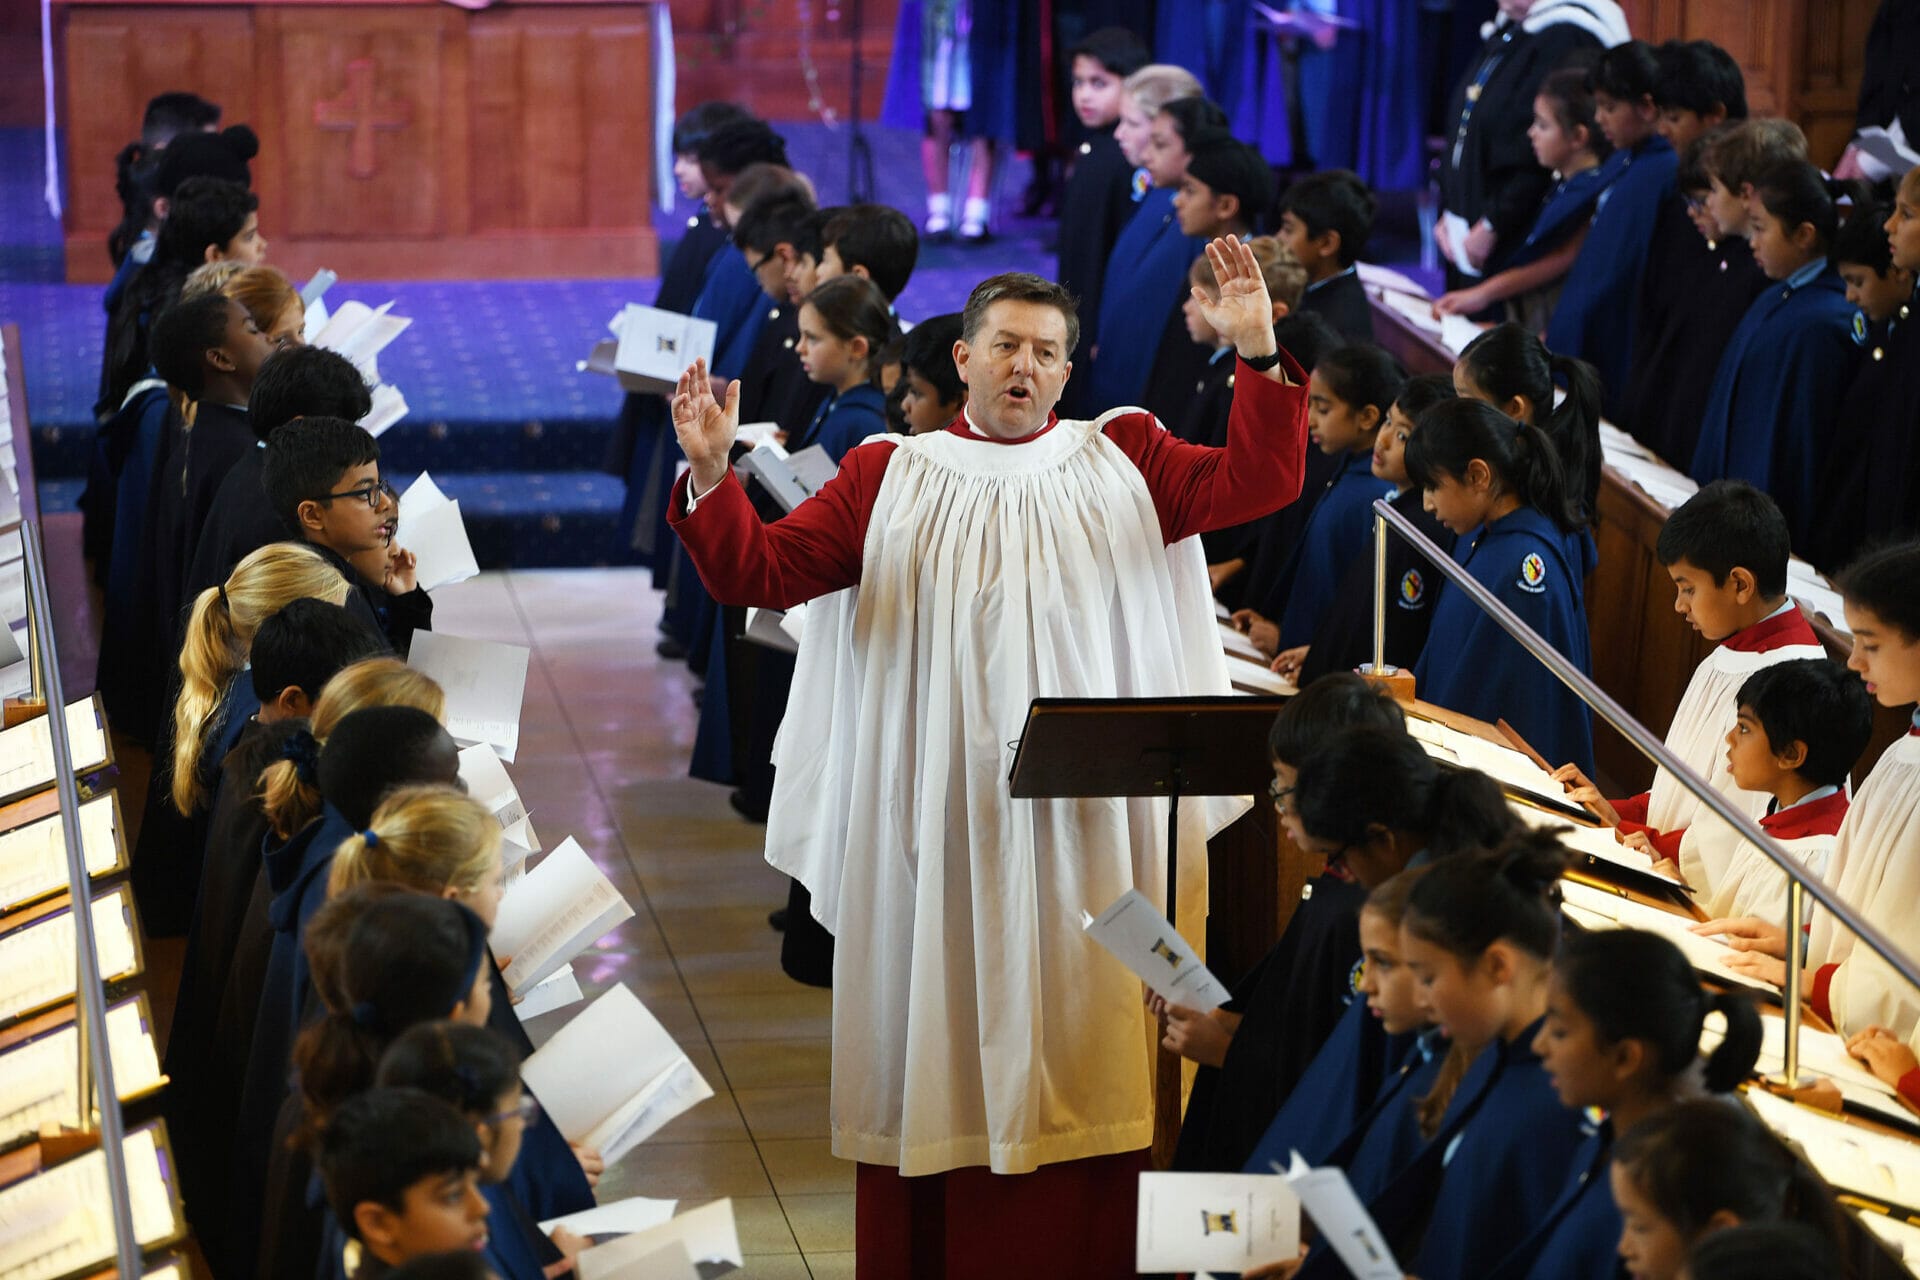 Mr Nicklin, Director of Music at The Blue Coat School conducts the Chapel Choir during a Chapel Service.